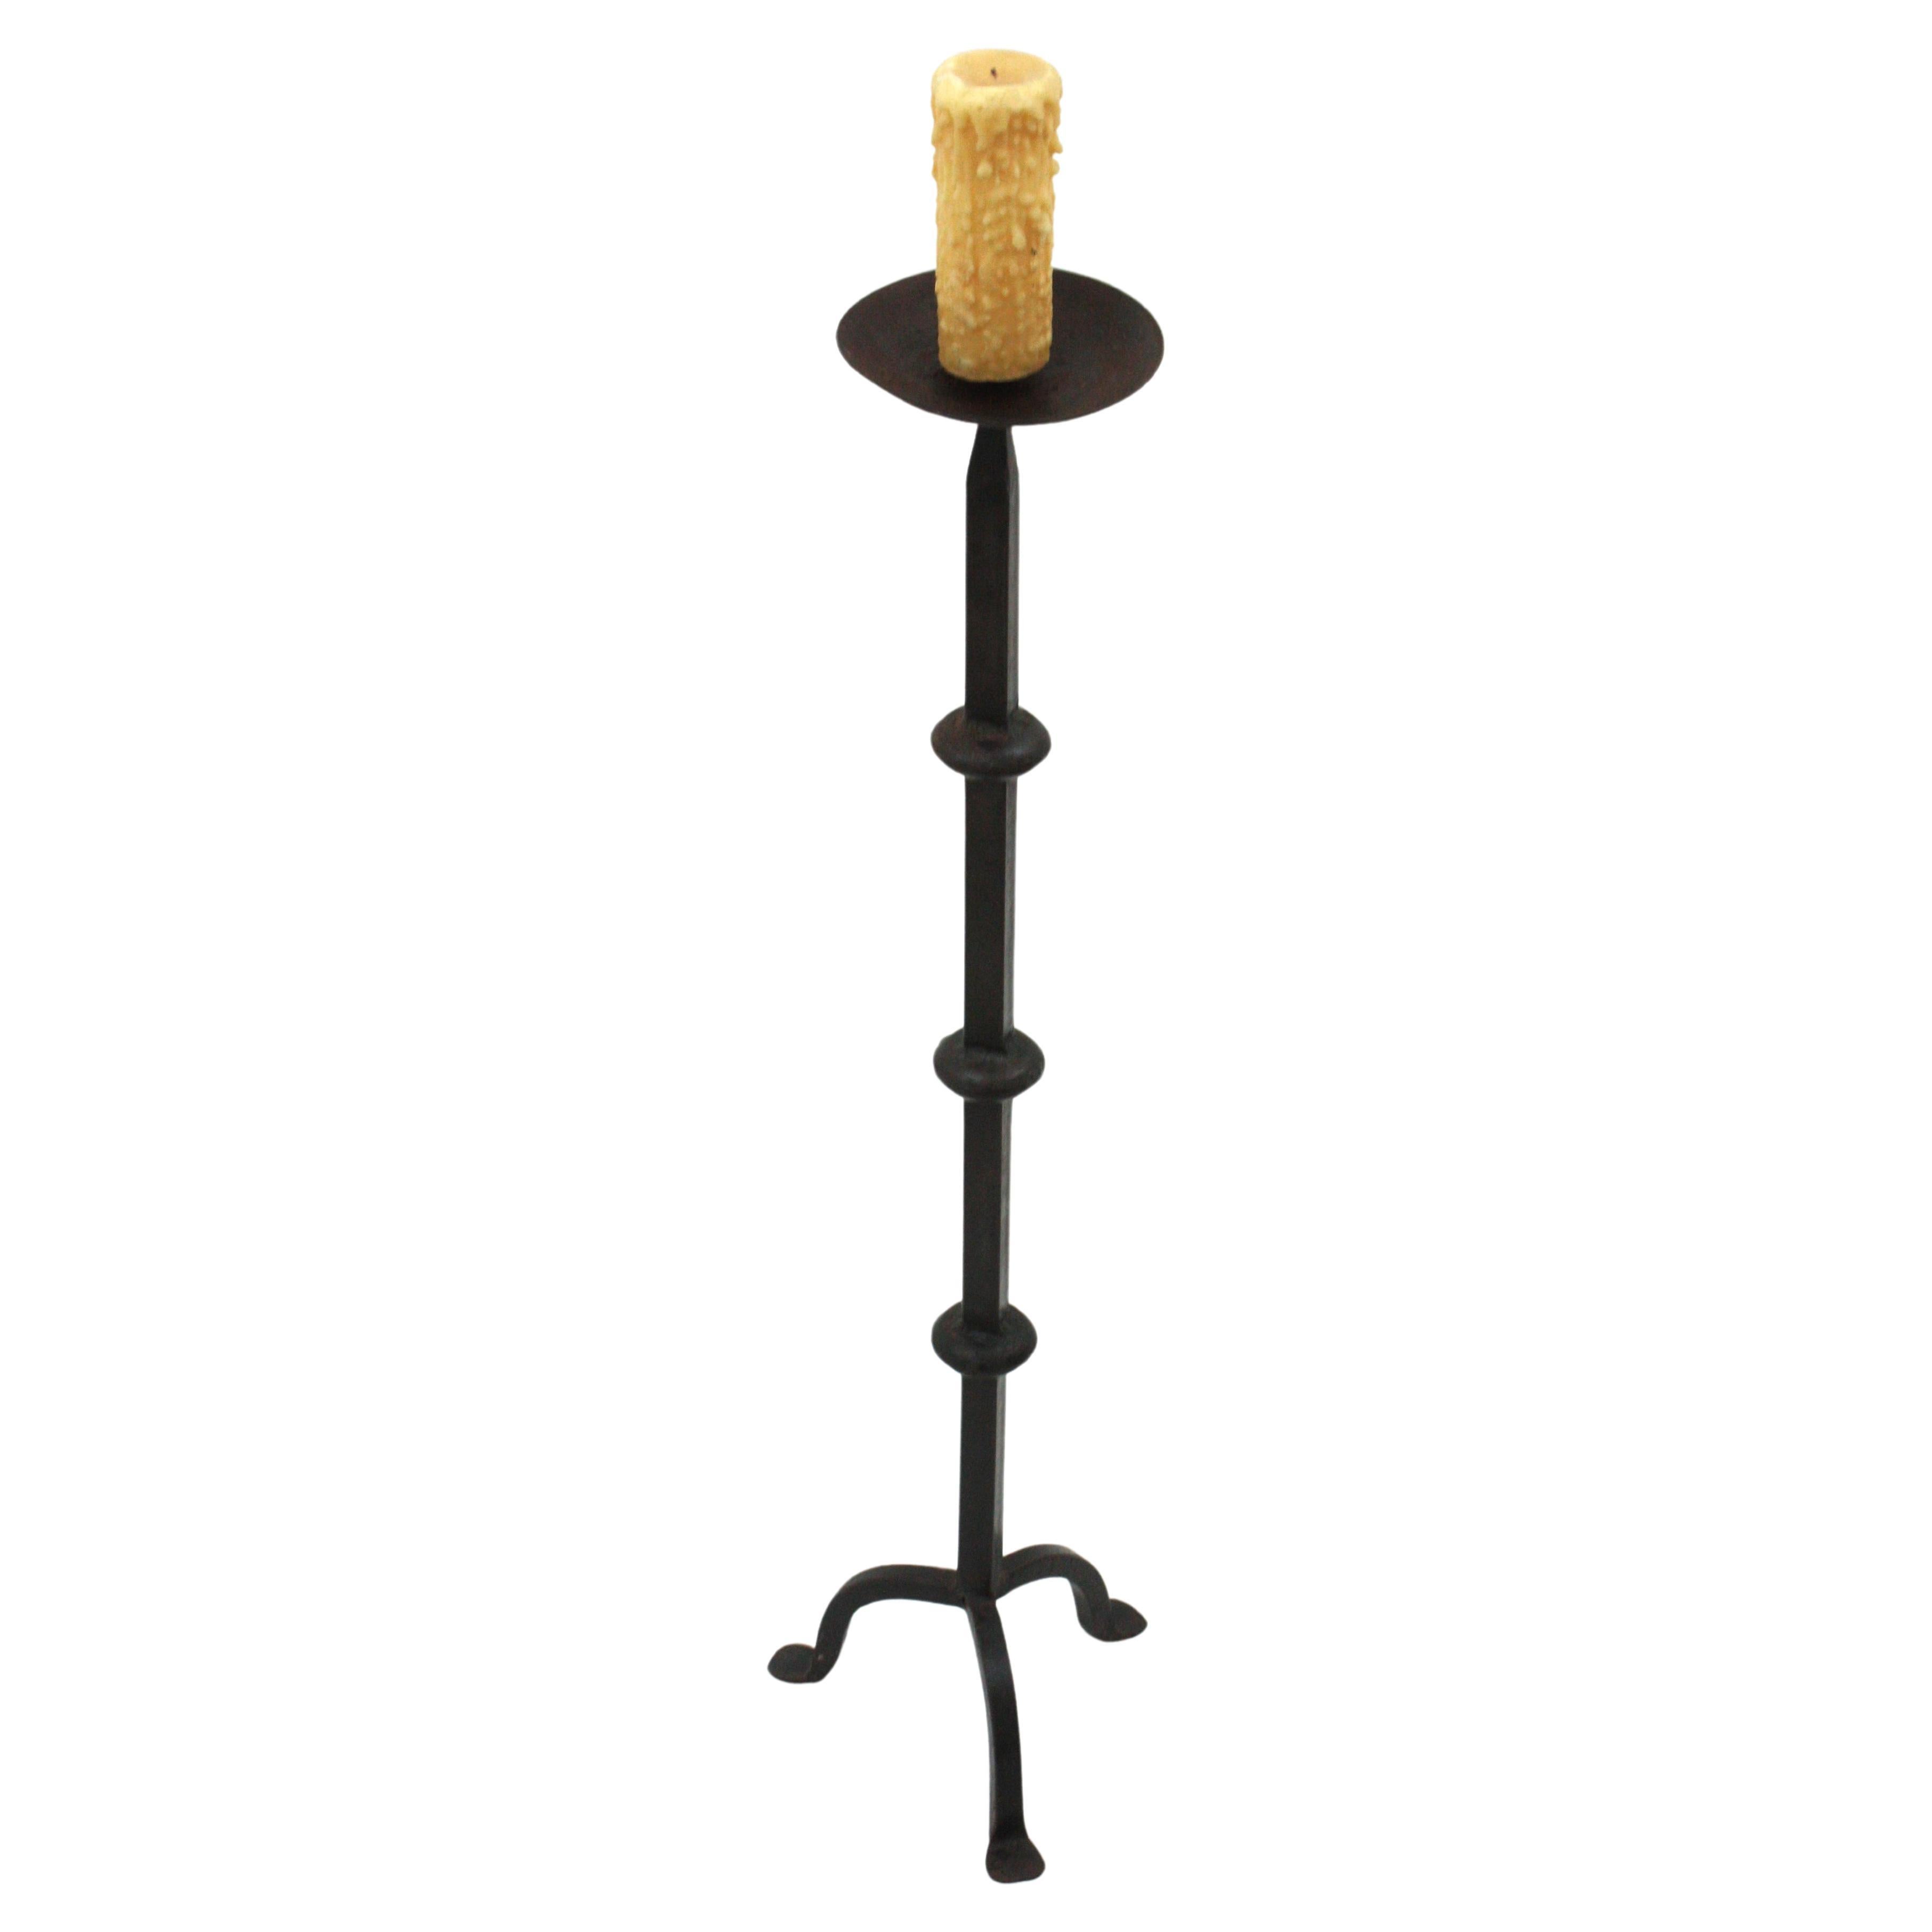 Spanish Medieval Hand Forged Iron Candle Stand / Floor Candle Holder For Sale